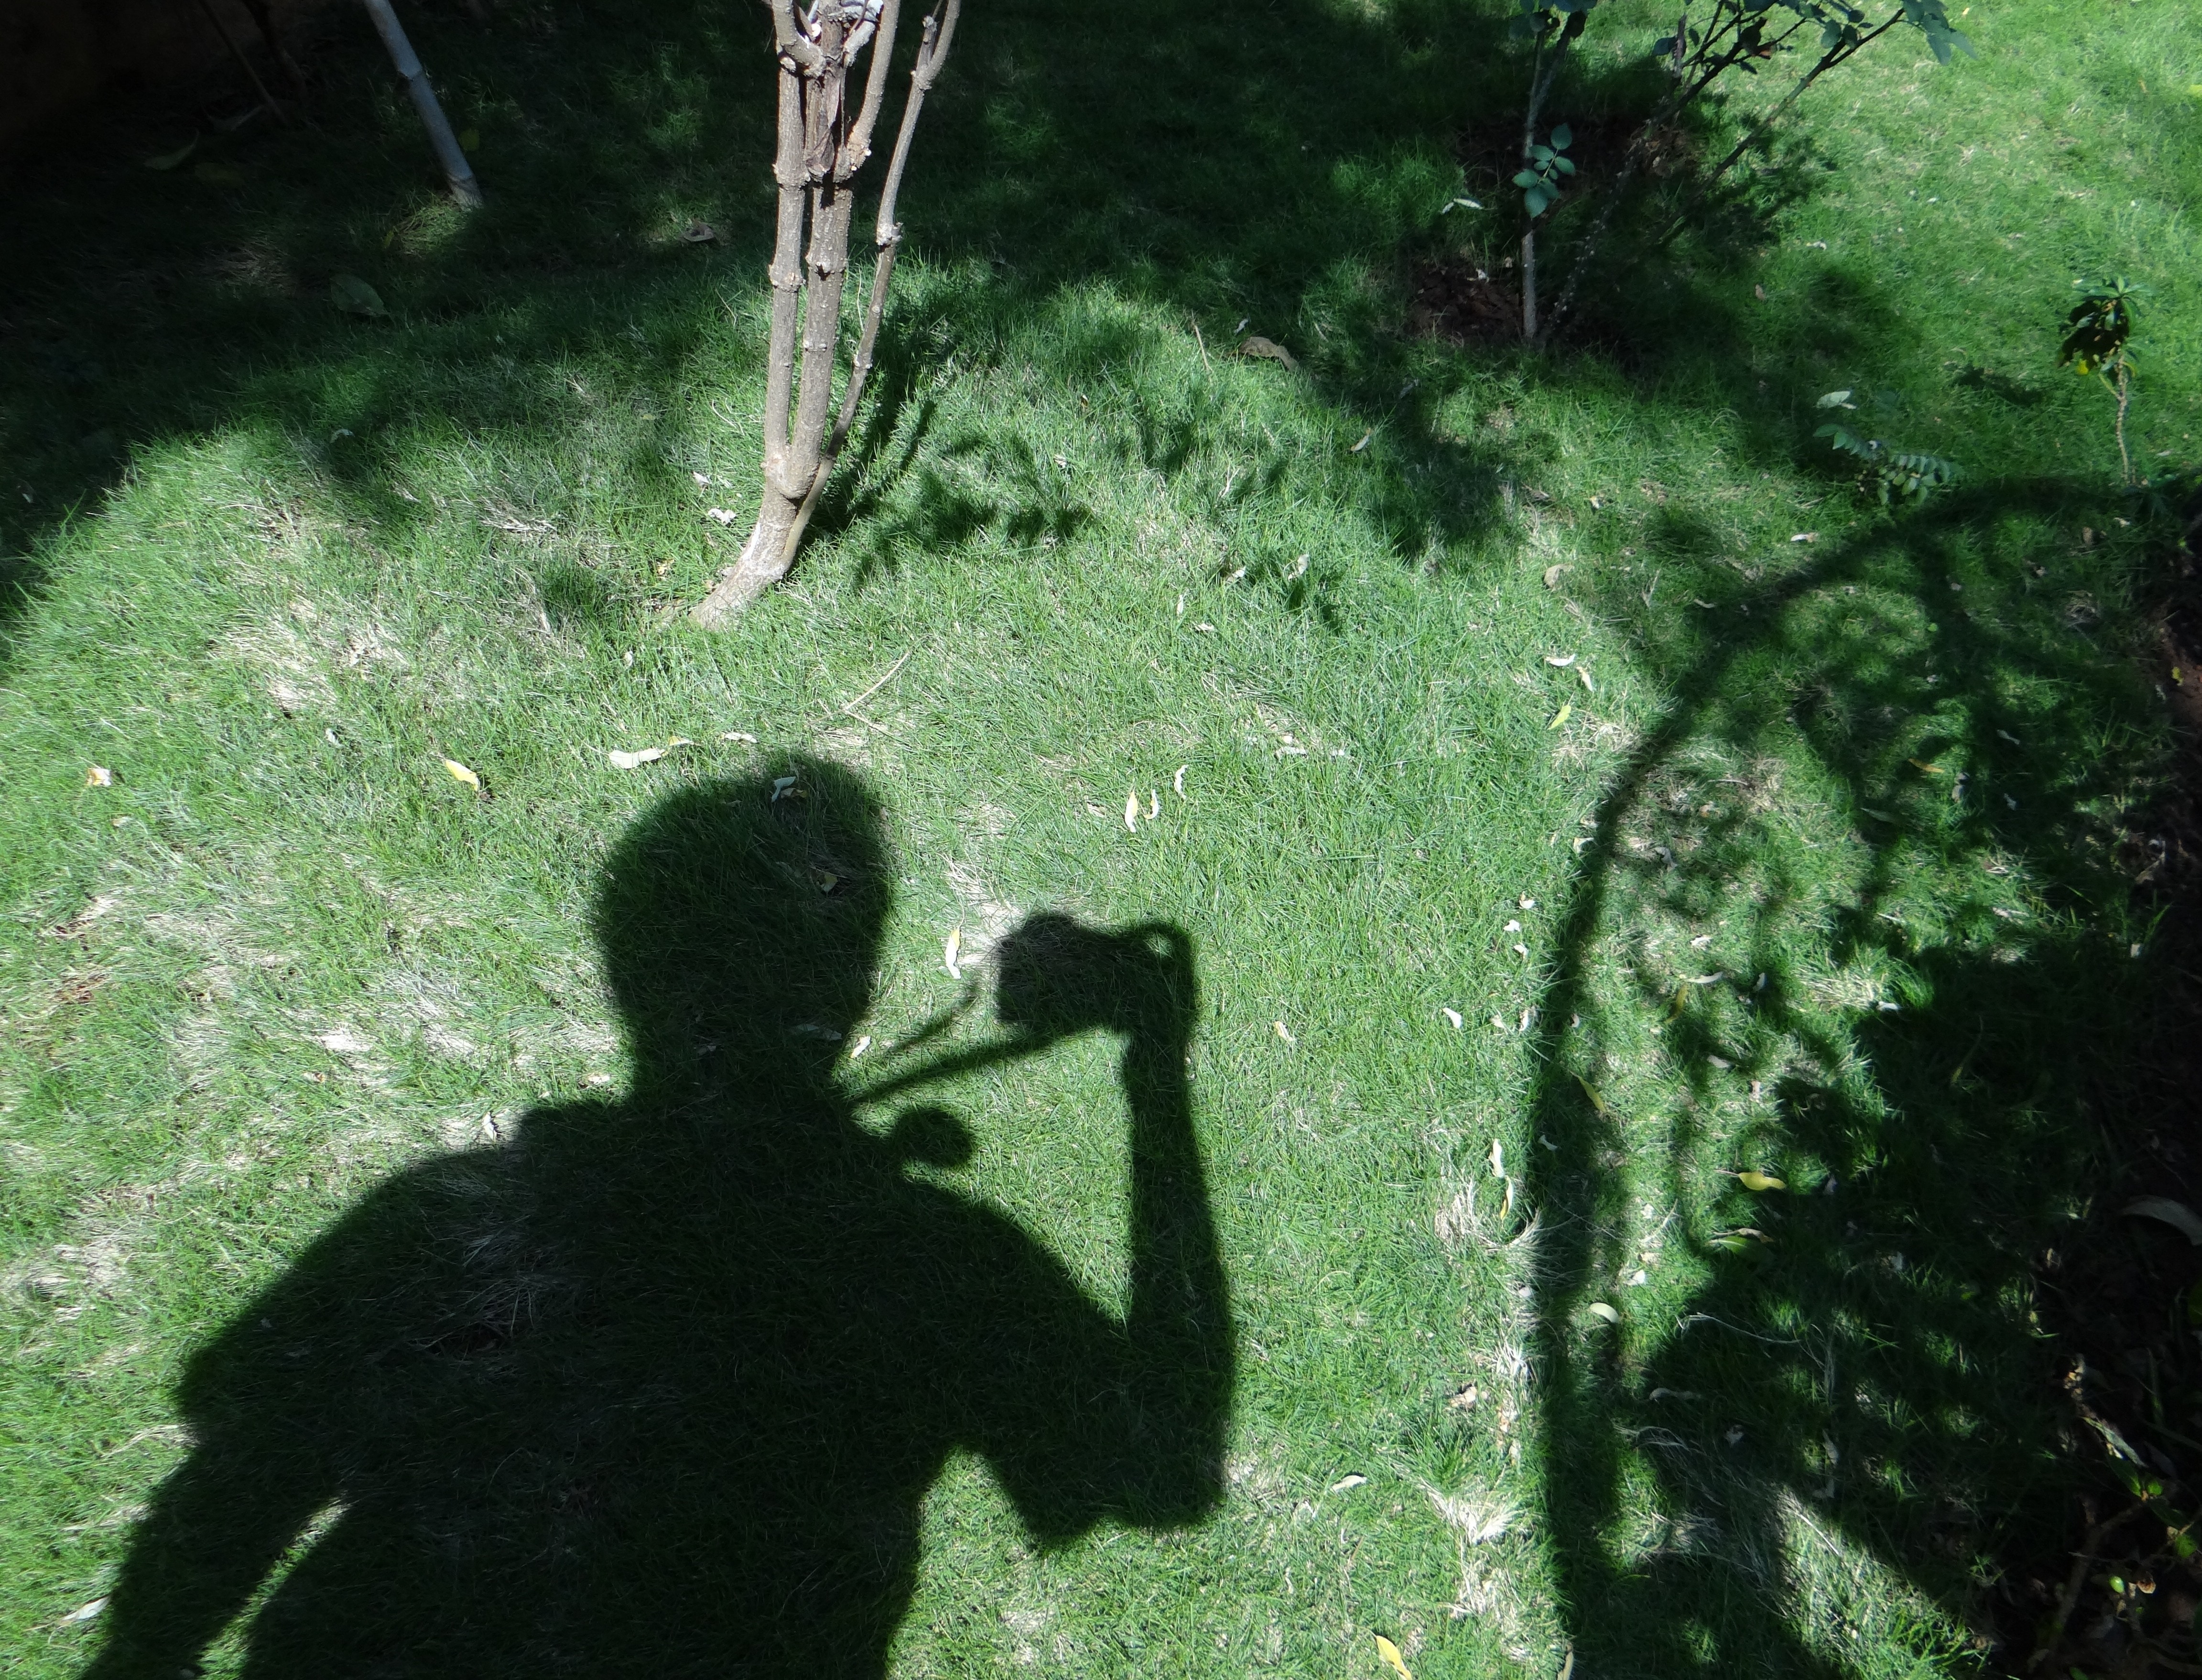 Human, Shadows, Photographer, Lawns, photographing, photography themes